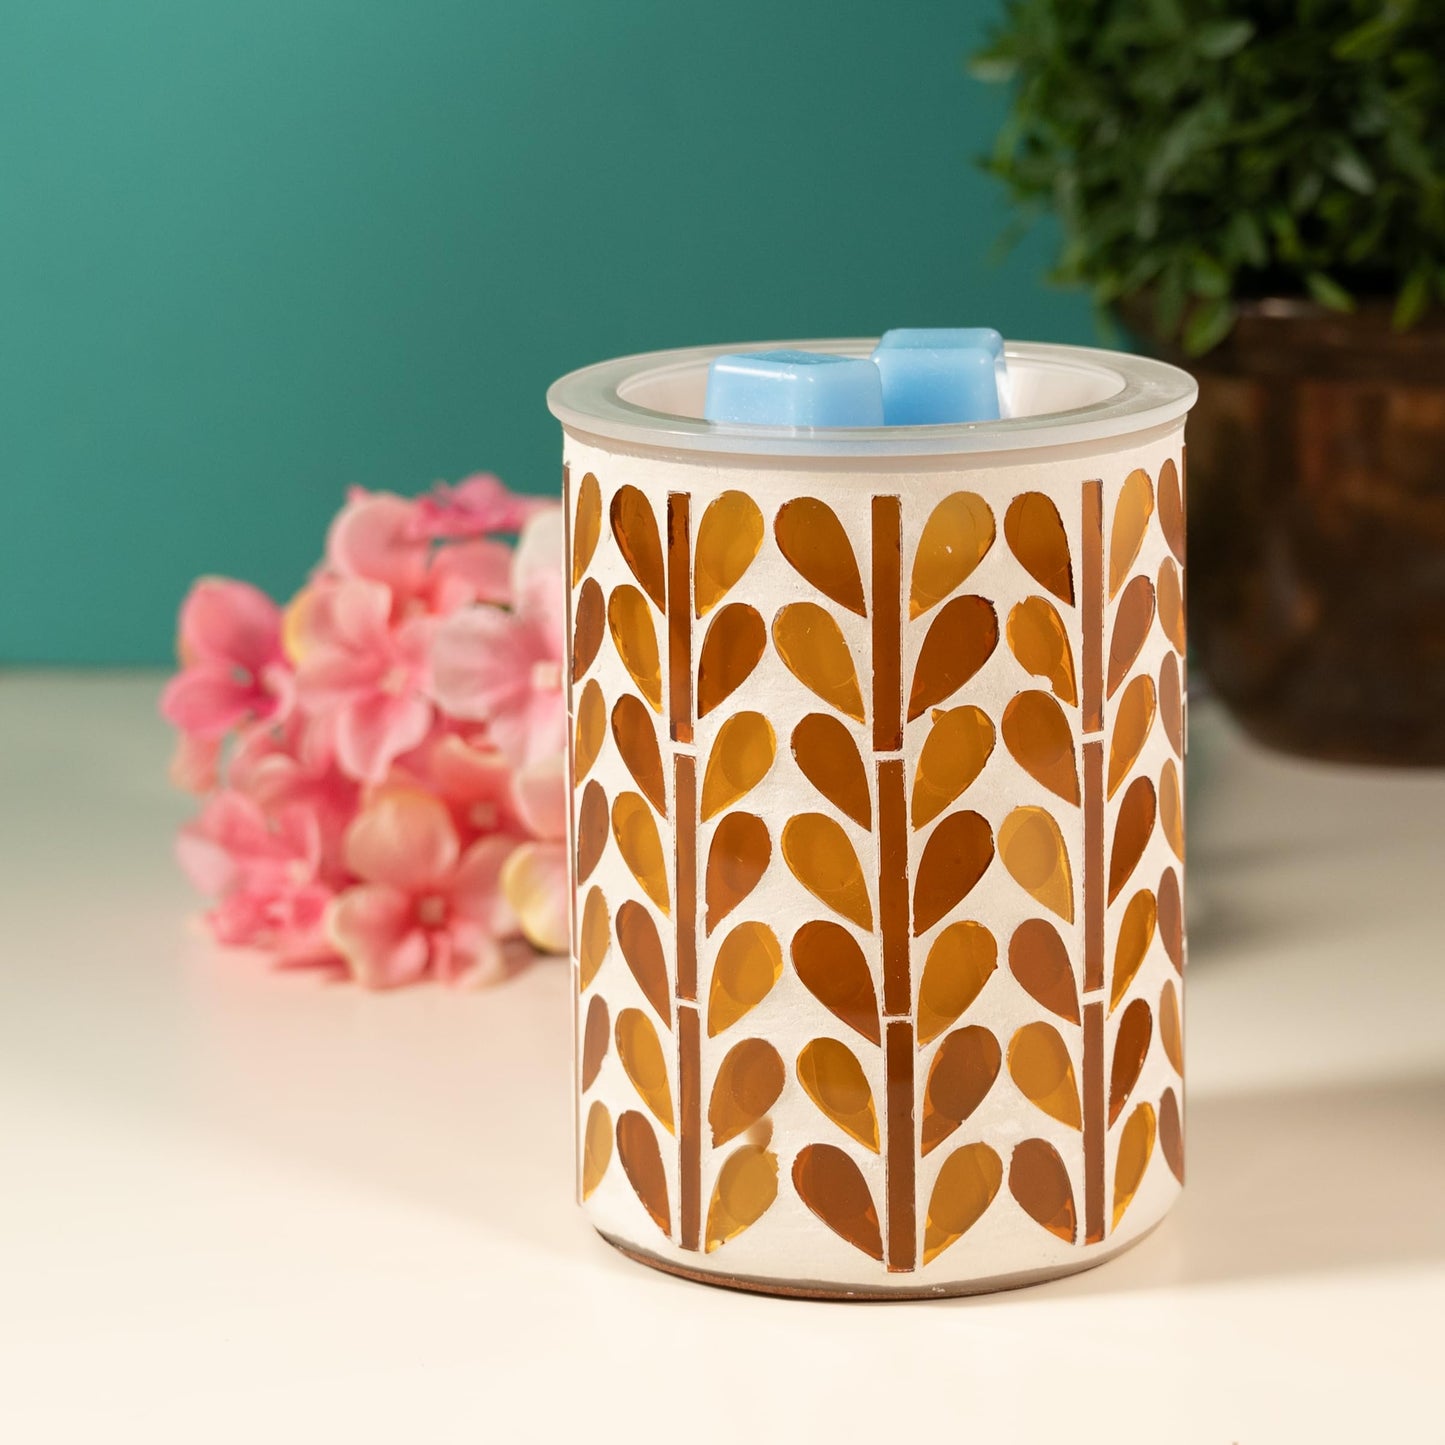 Scentsationals Mosaic Collection - Garden Delight - Scented Wax Warmer - Fragrance Wax Cube Melter & Burner - Electric Home Air Freshener Art Gift